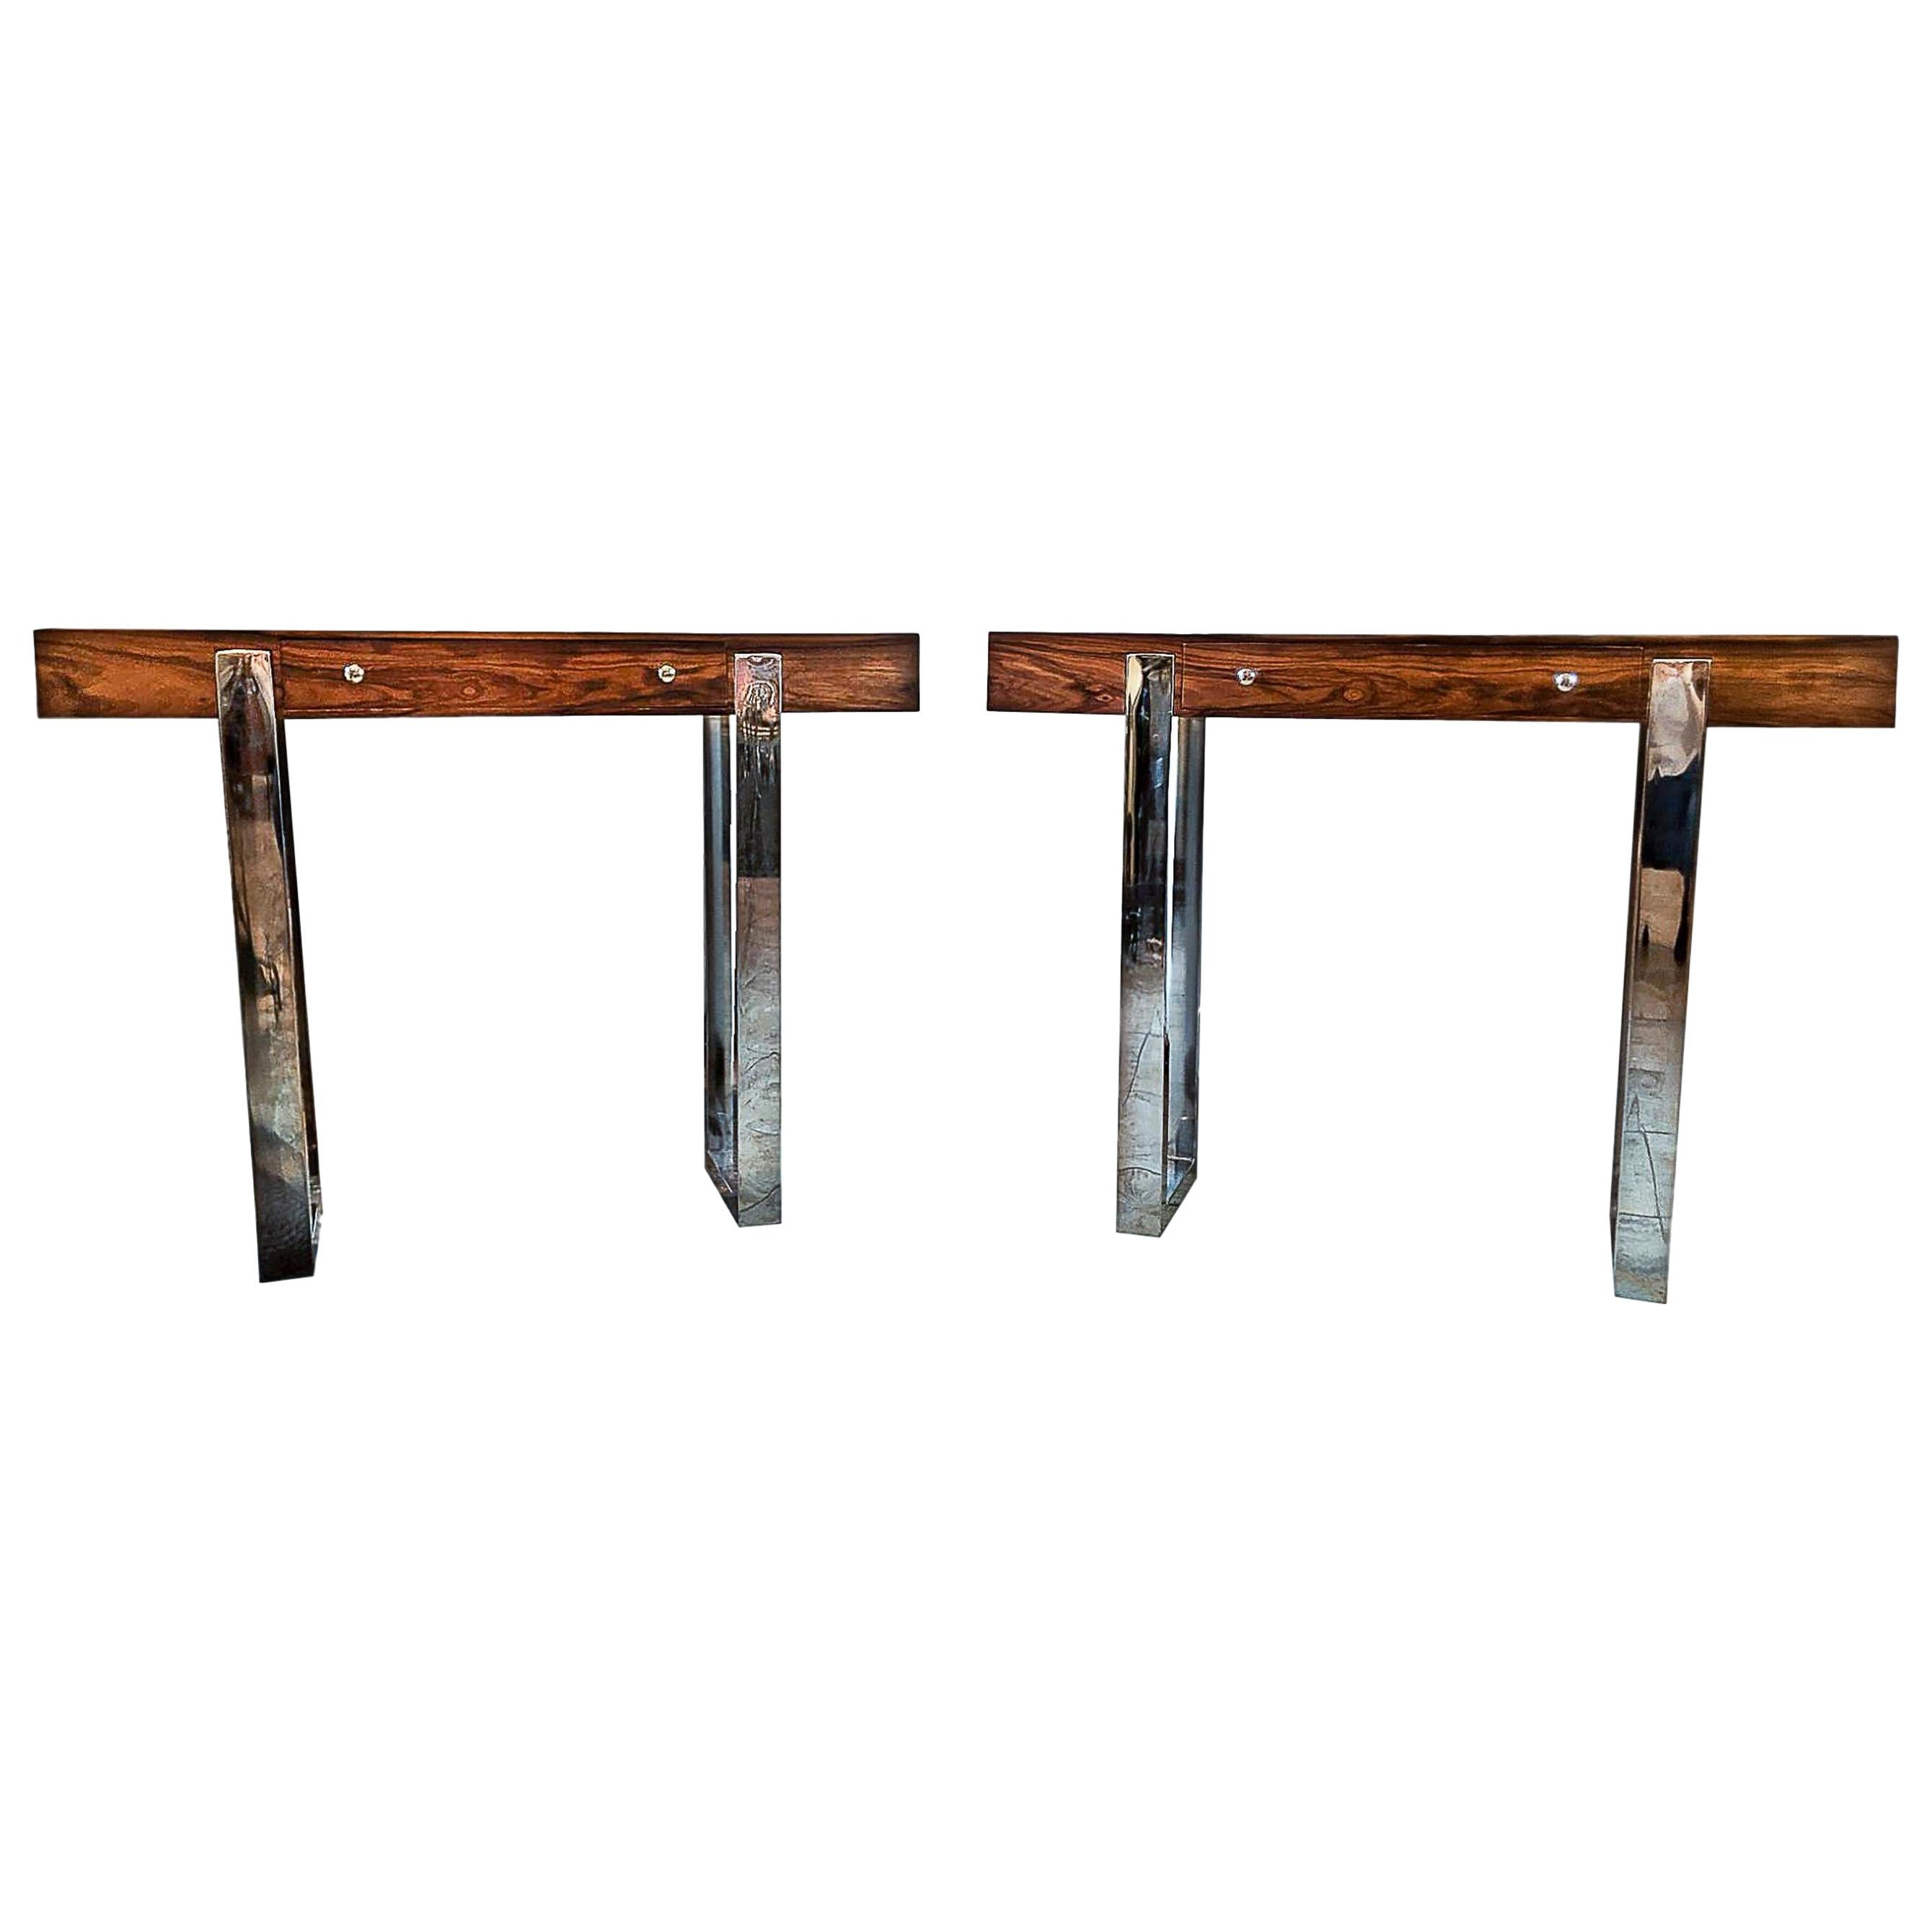 Pair of Mid-Century Modern Rosewood and Chrome Console Tables, Italian